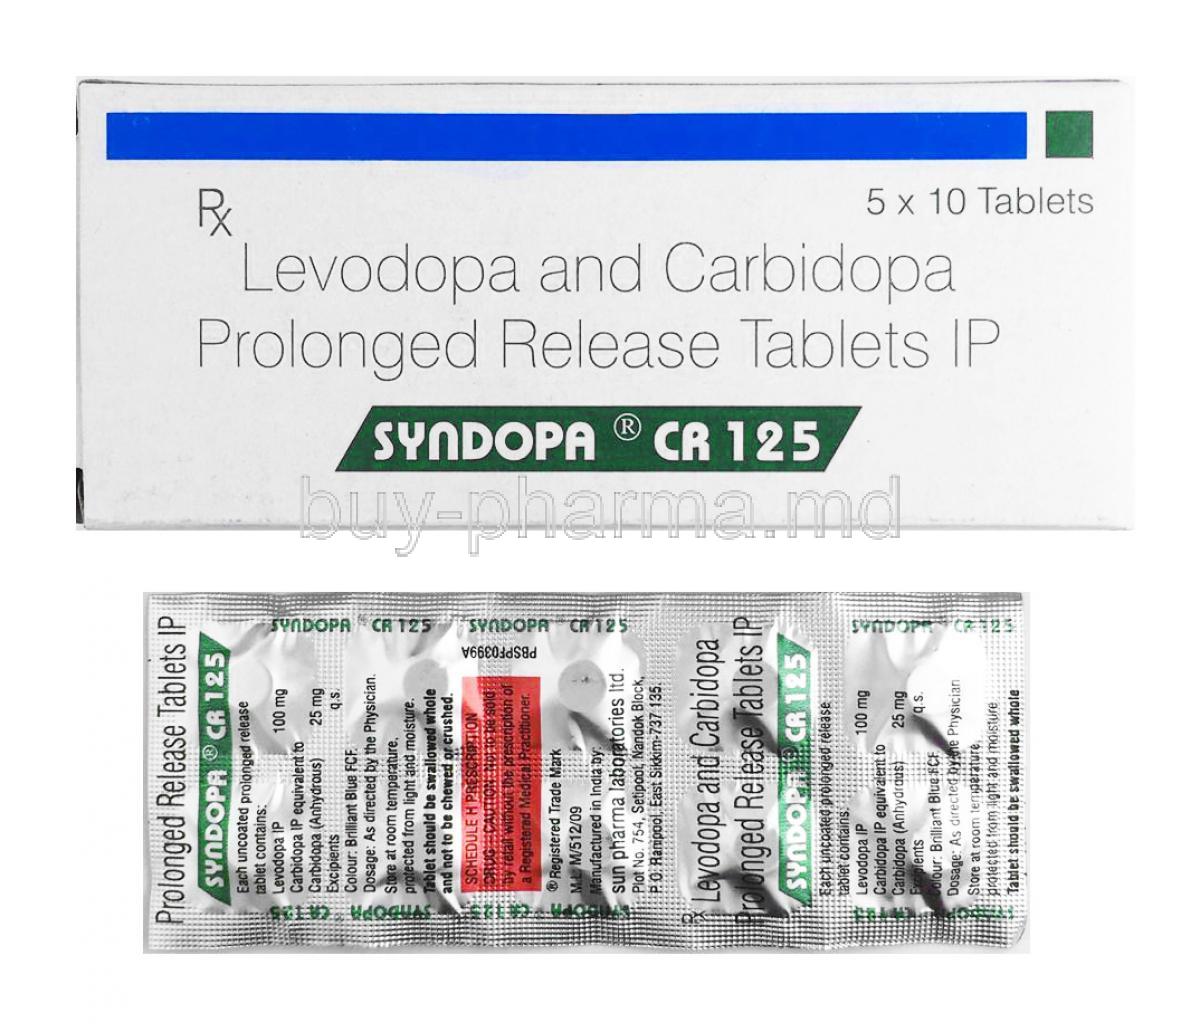 Syndopa CR 125, Levodopa and Carbidopa box and tablet